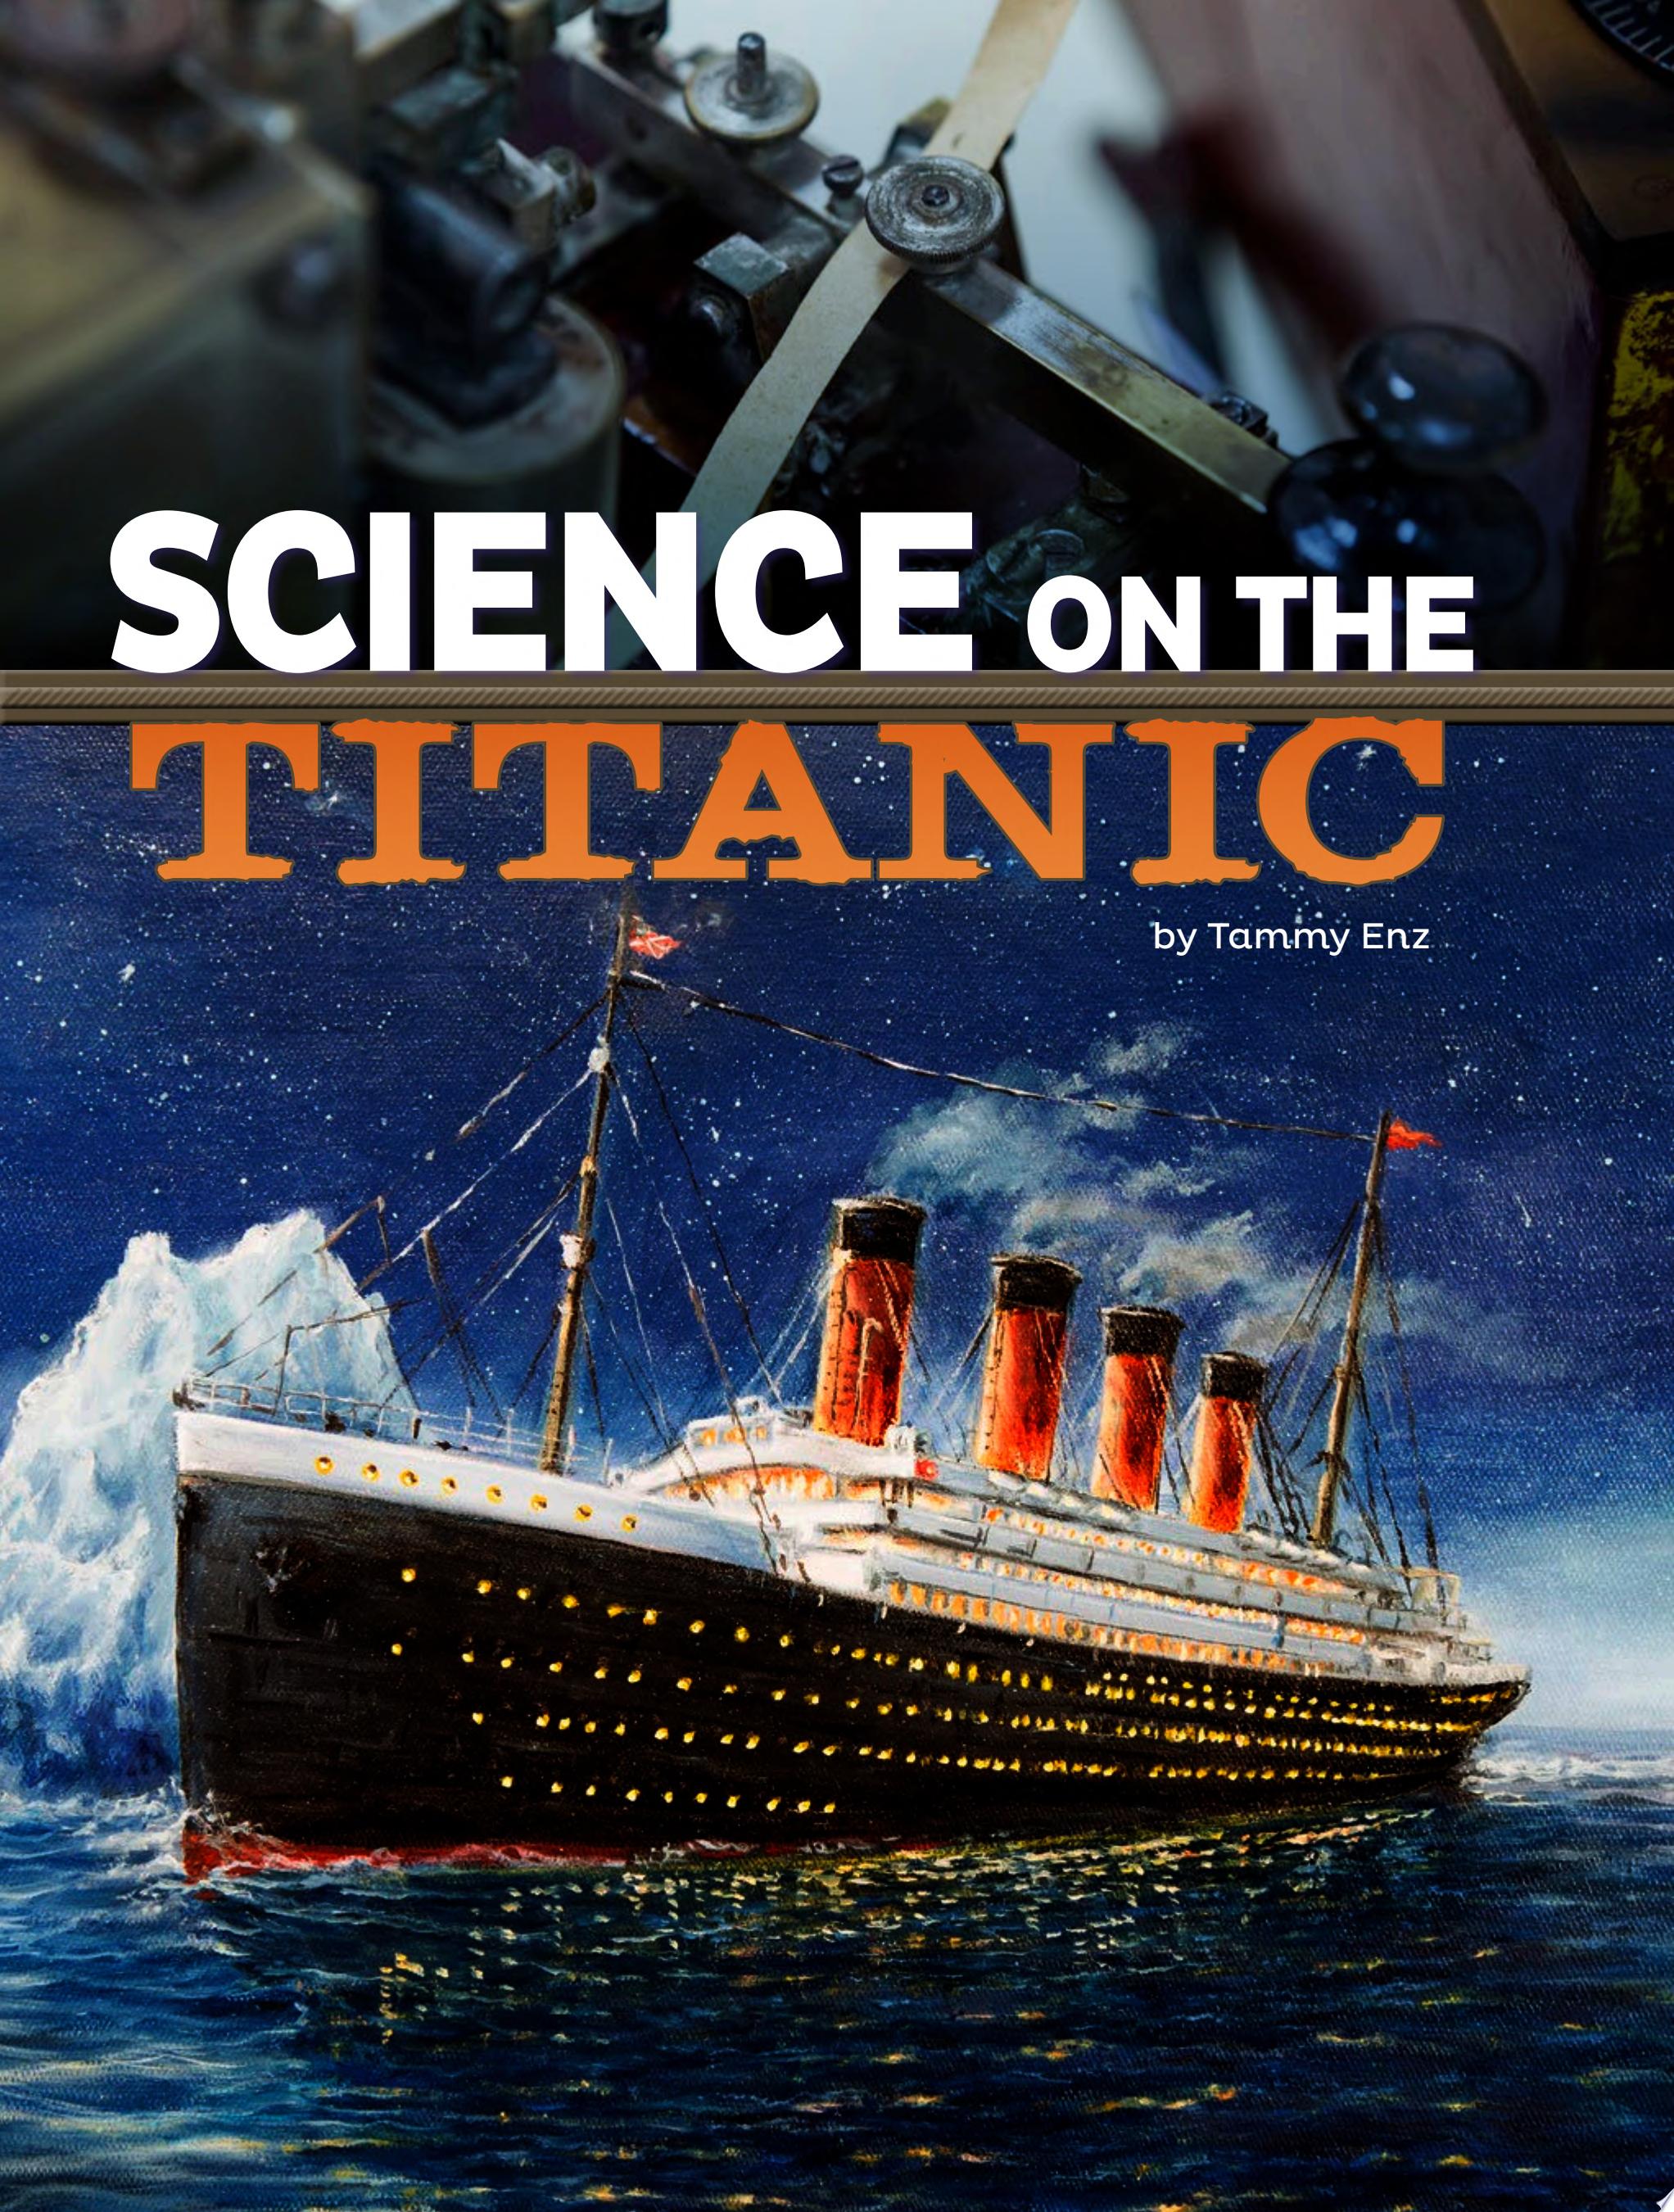 Image for "Science on the Titanic"